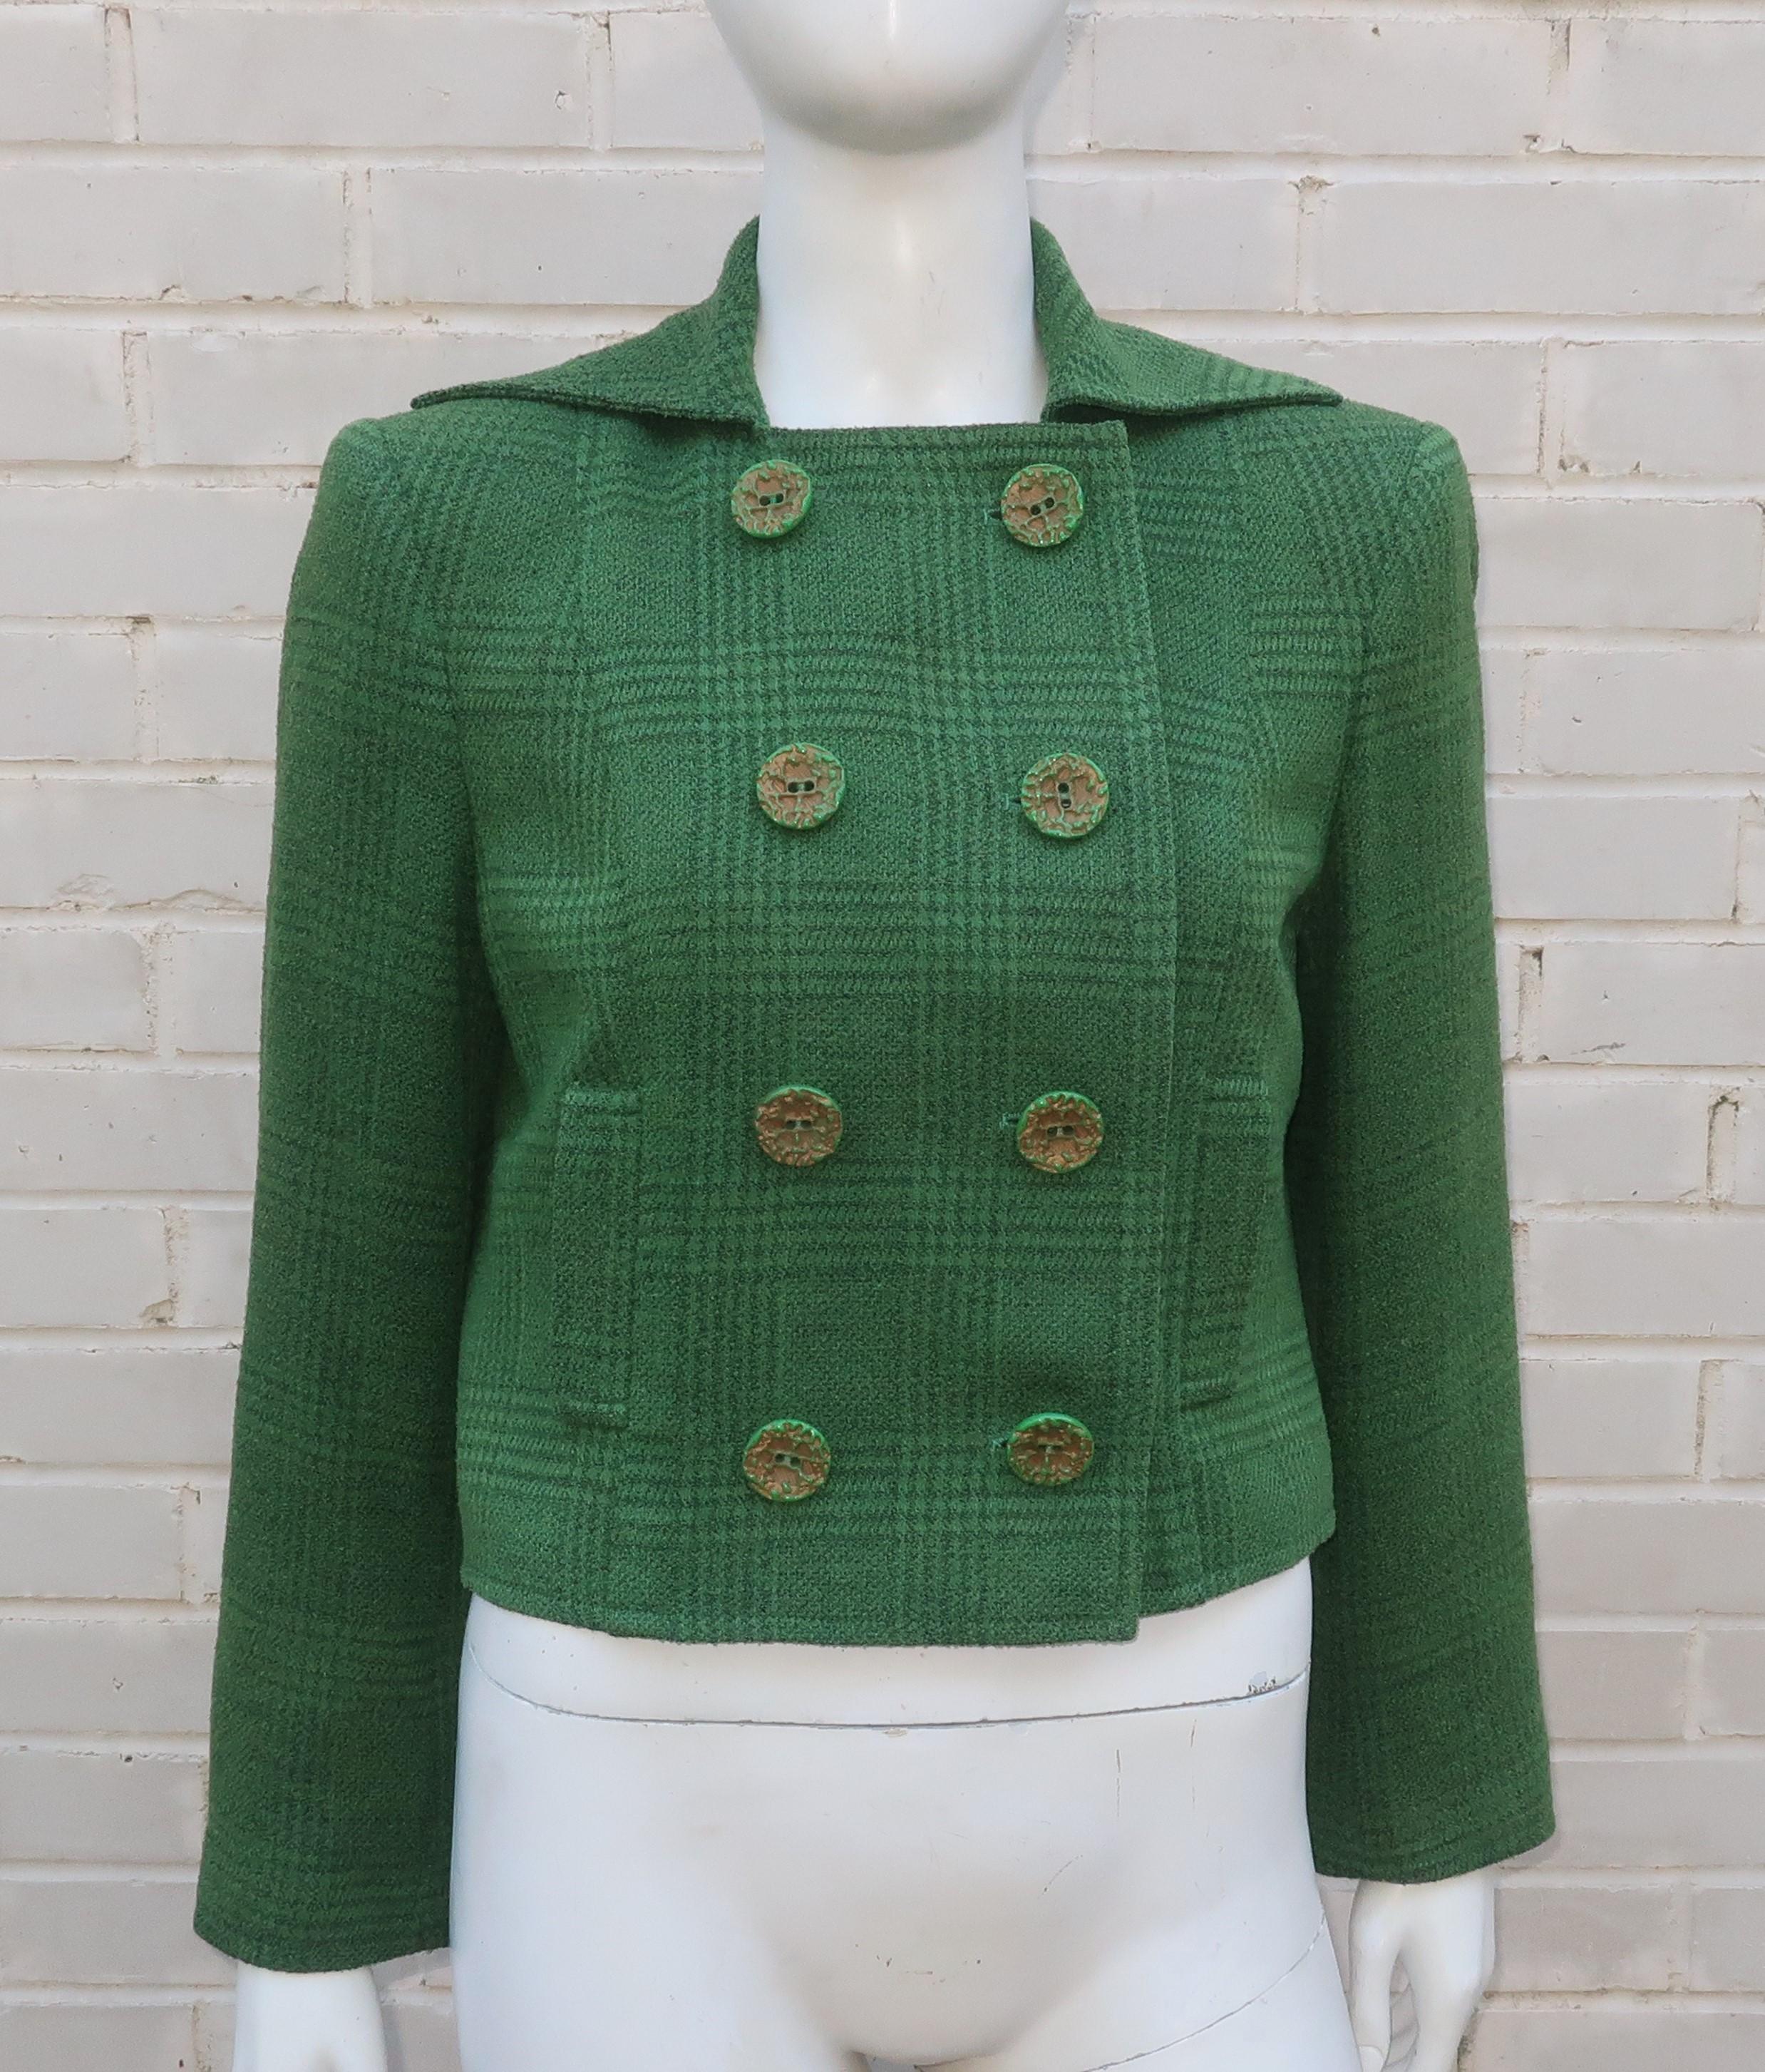 1980's Christian Lacroix double breasted cropped jacket in a green glen plaid wool crepe with a textured finish reminiscent of boucle.  The interior is lined in a bright green silk and the exterior features faux side pockets and wonderful large dark